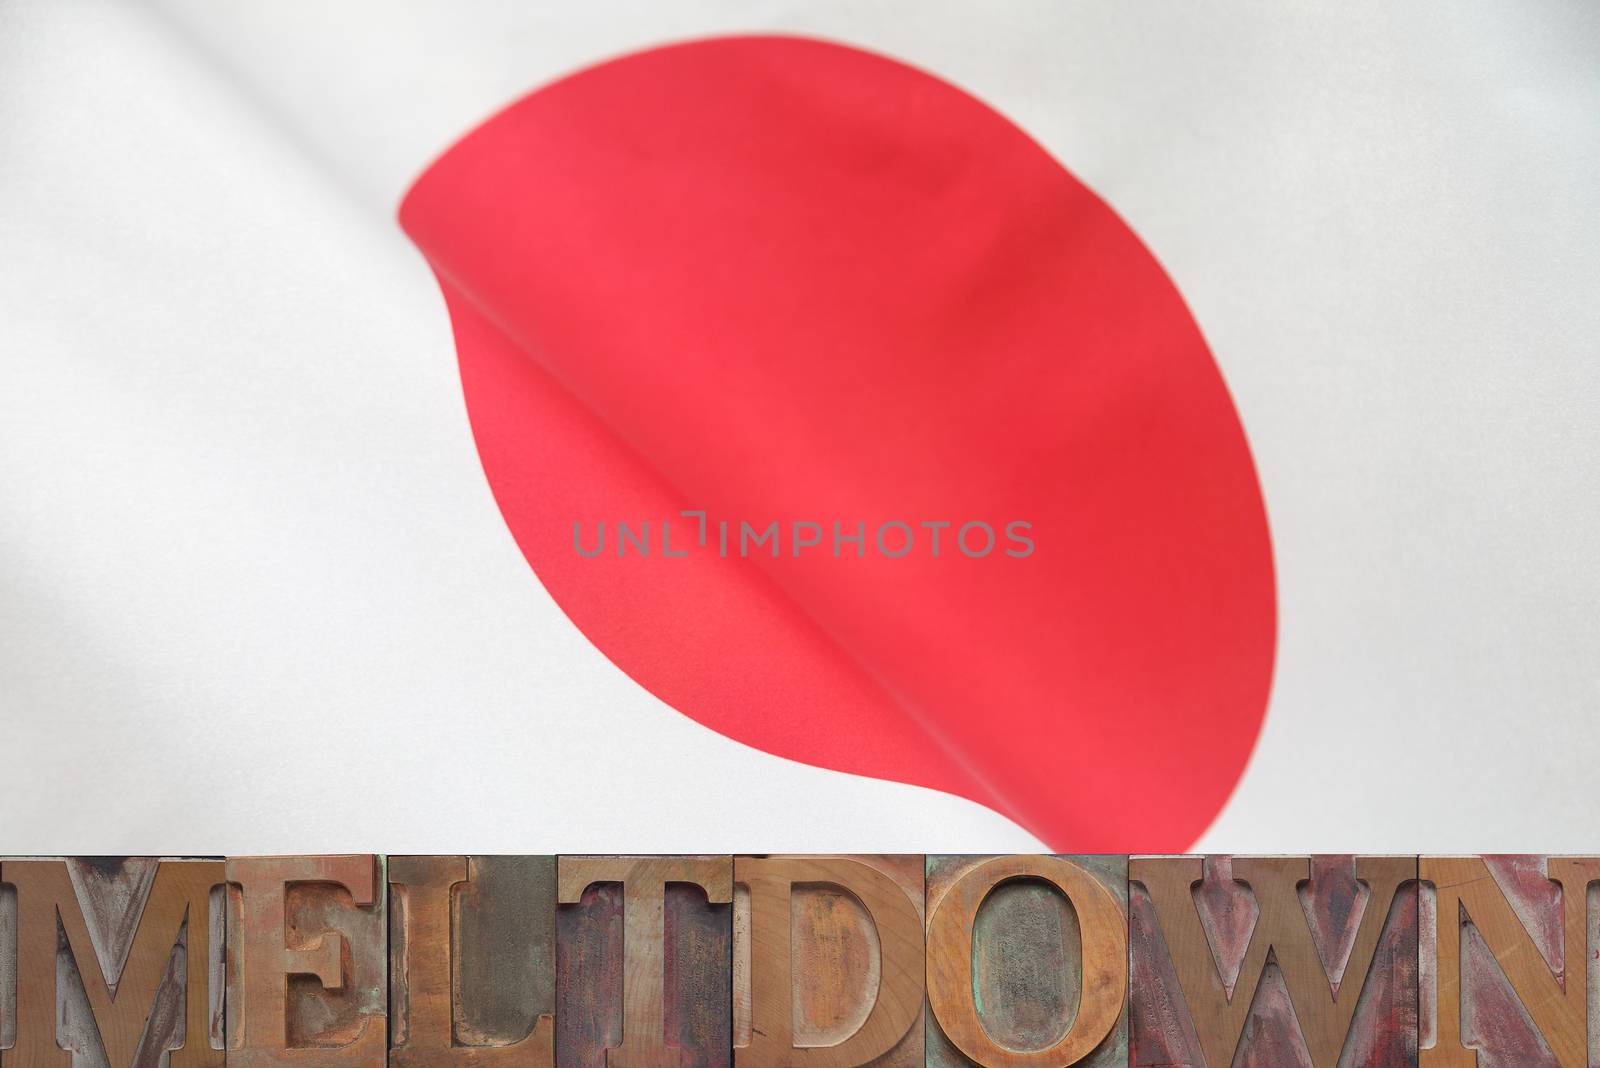 the word meltdown in old wood type on a Japanese flag